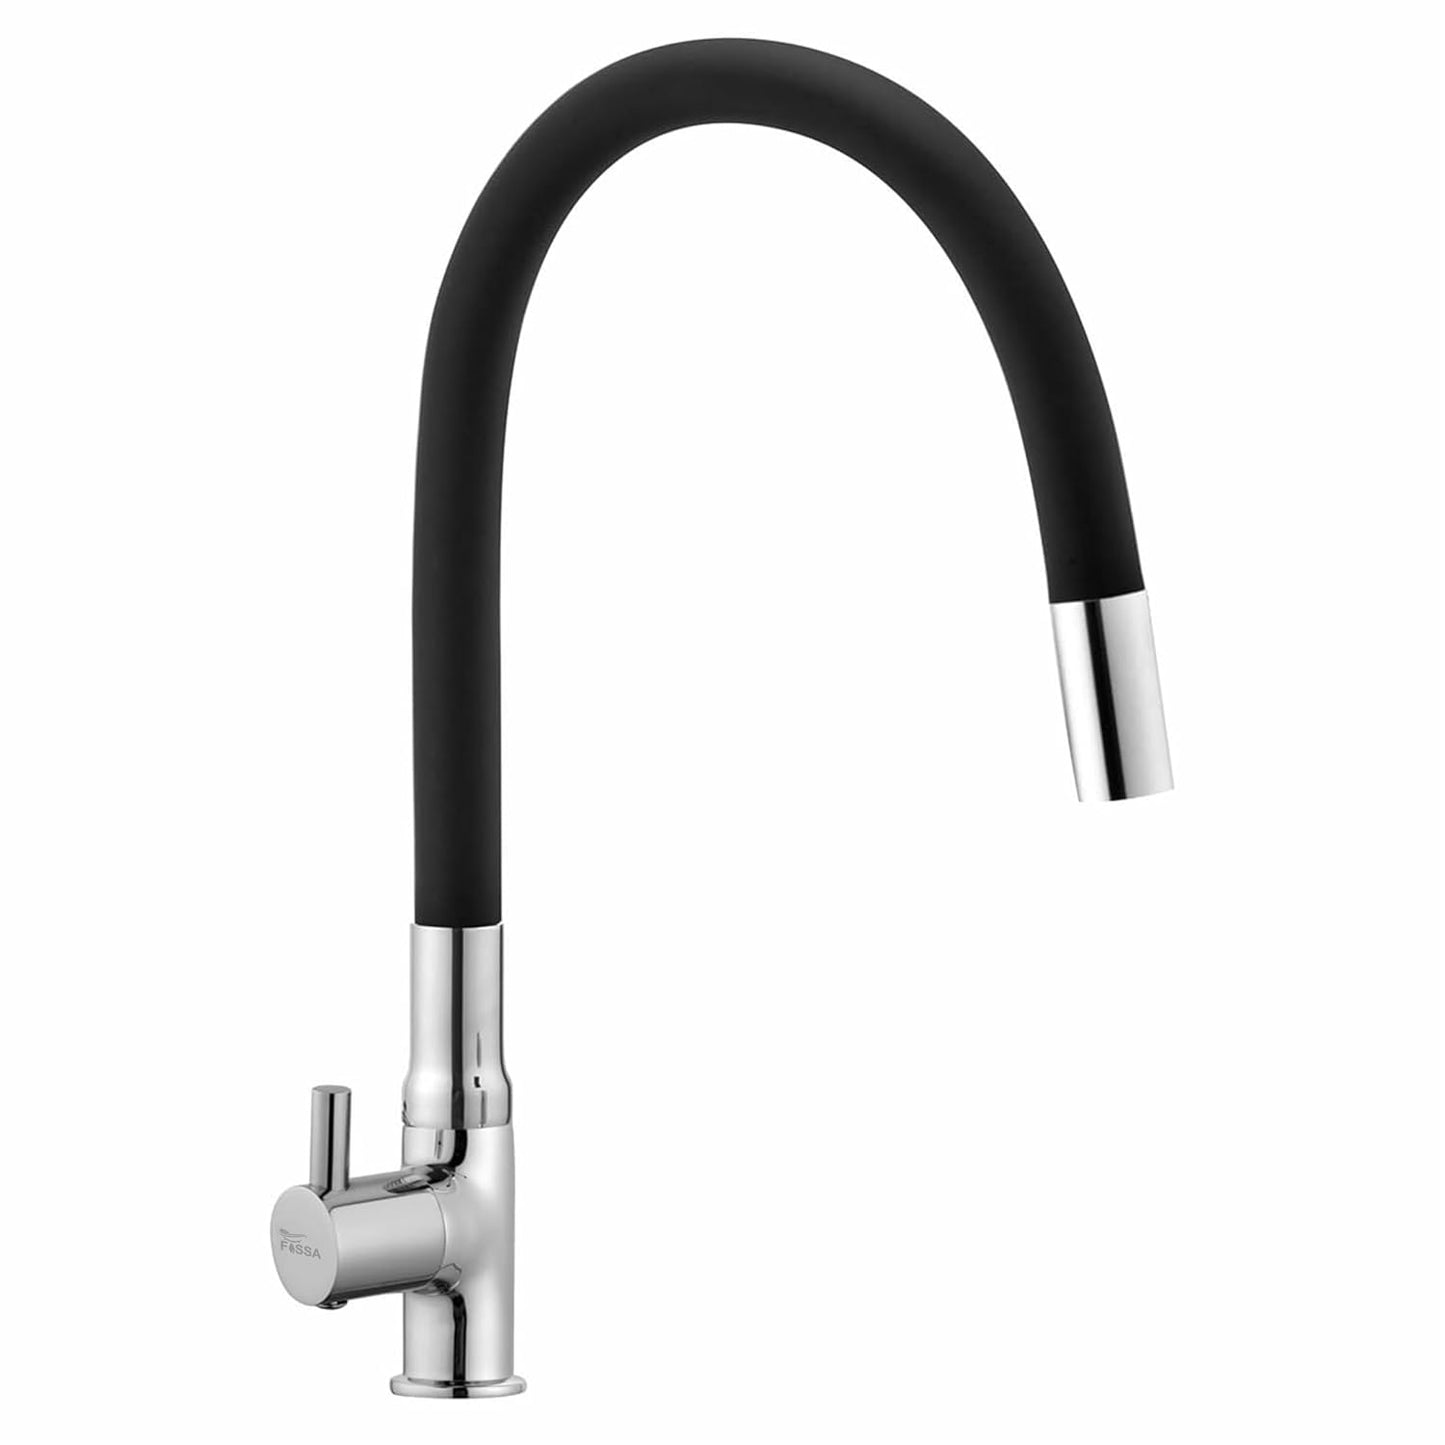 Fossa Orbit 20 Inch Swan Neck Faucet, Tap 360° rotatable Flexible Functional Water tap for Kitchen Sinks Spout Chrome Finish (Silicon Spout Black)